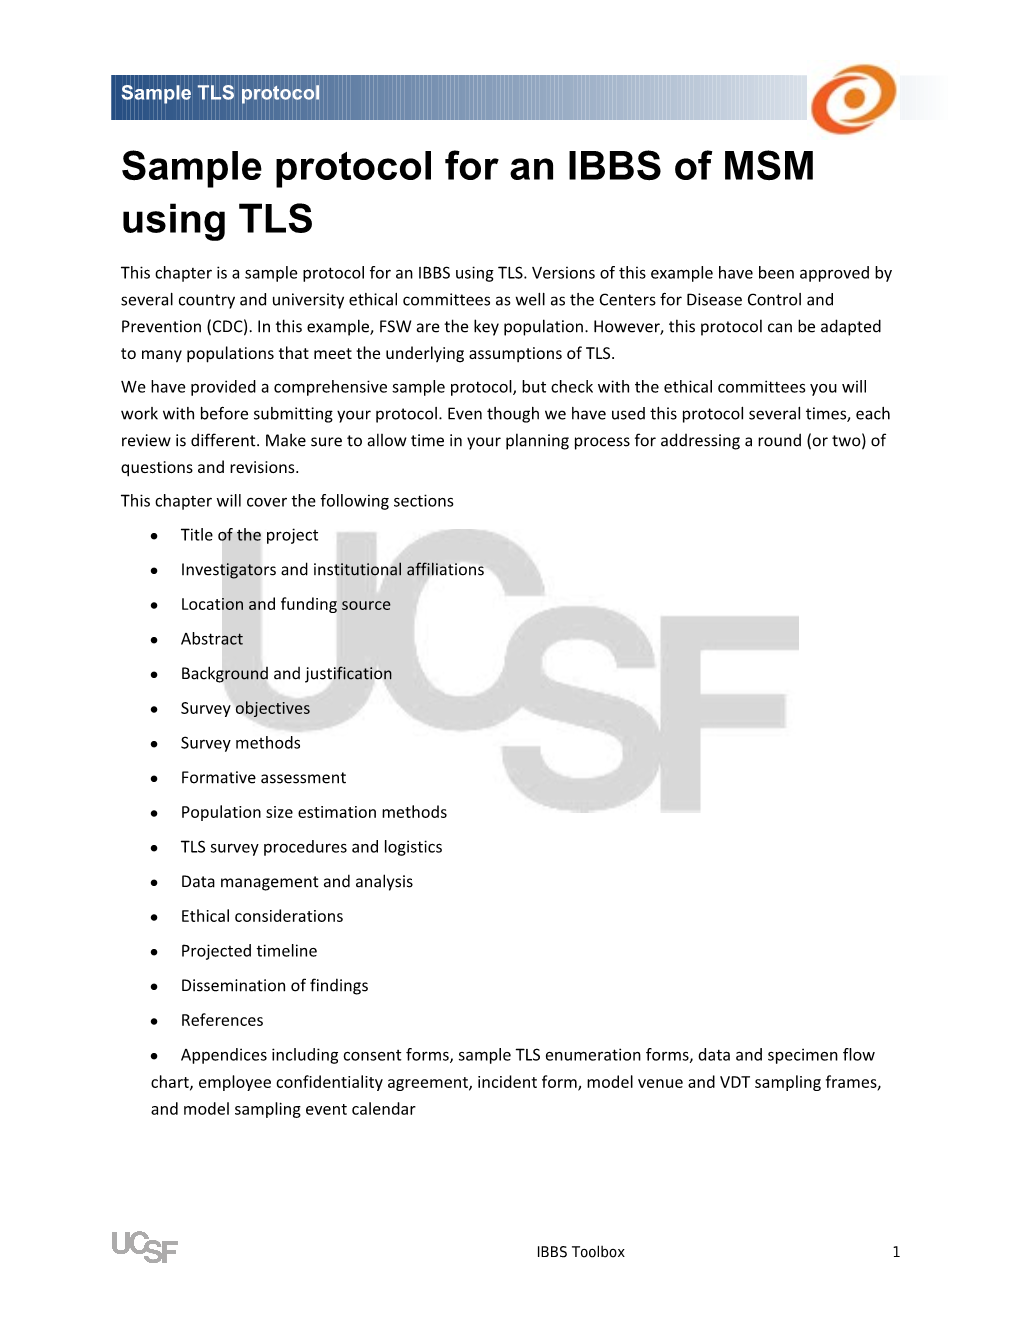 Sample Protocol for an IBBS of MSM Using TLS